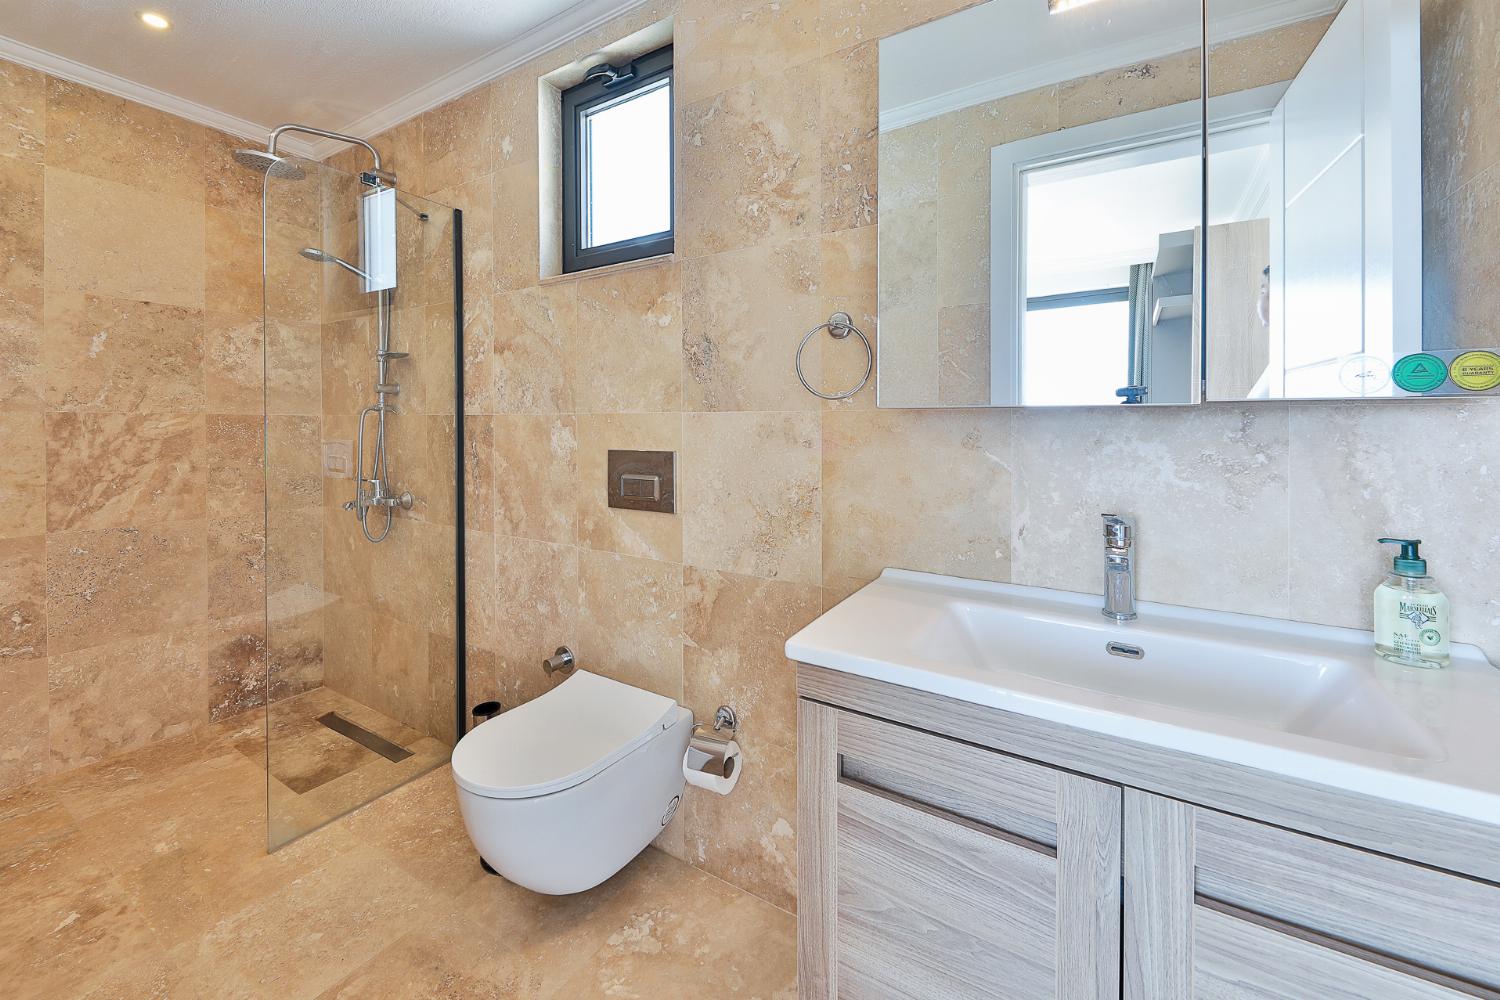 Ensuite bathroom with shower